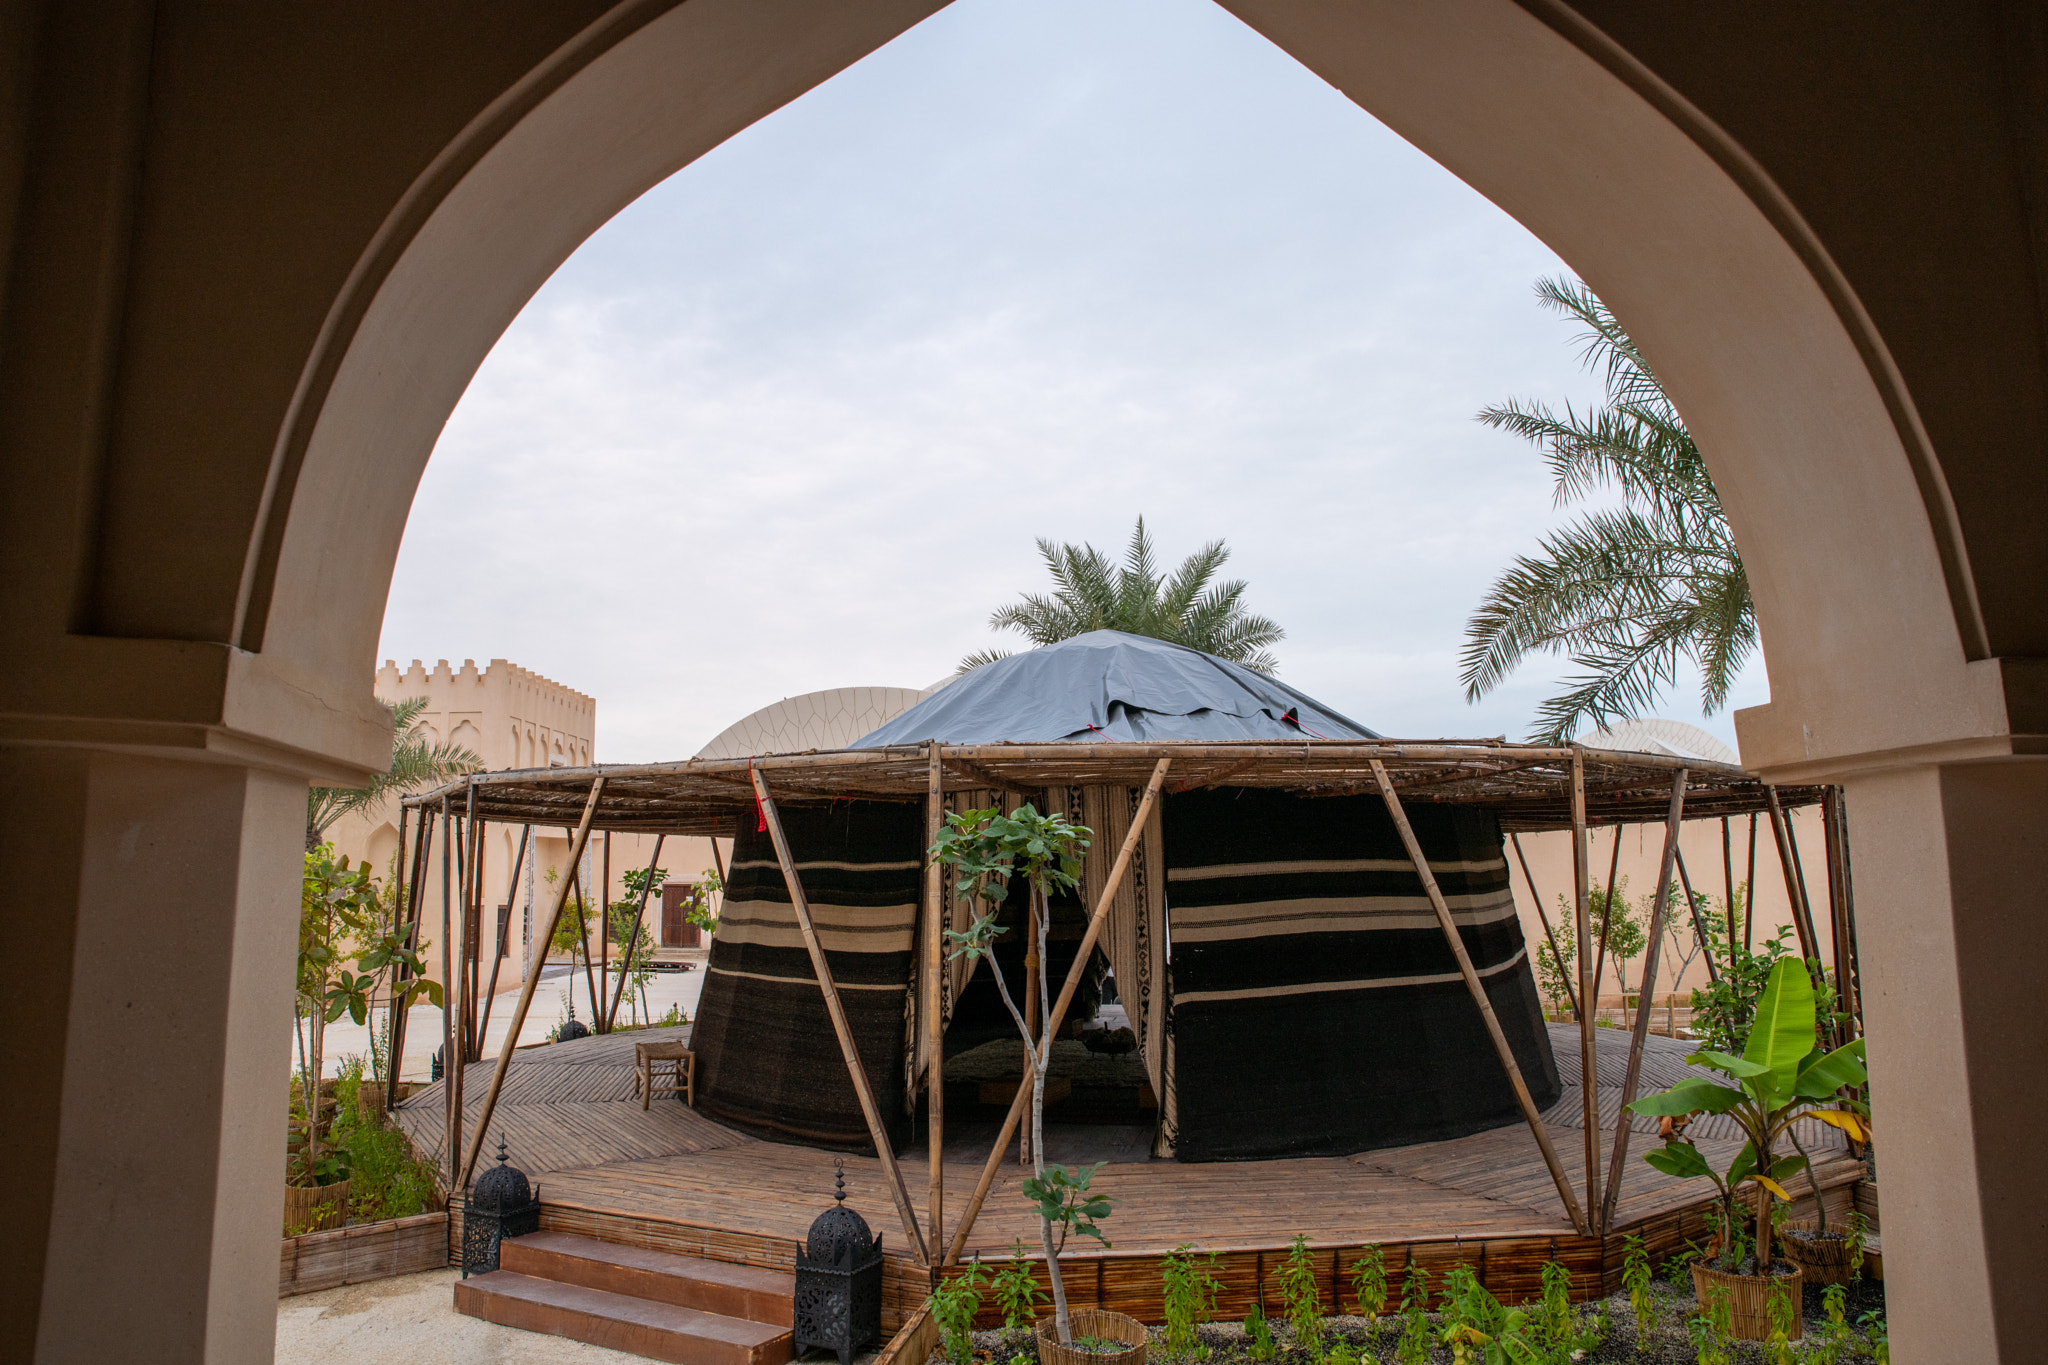 The traditional Arabic tent